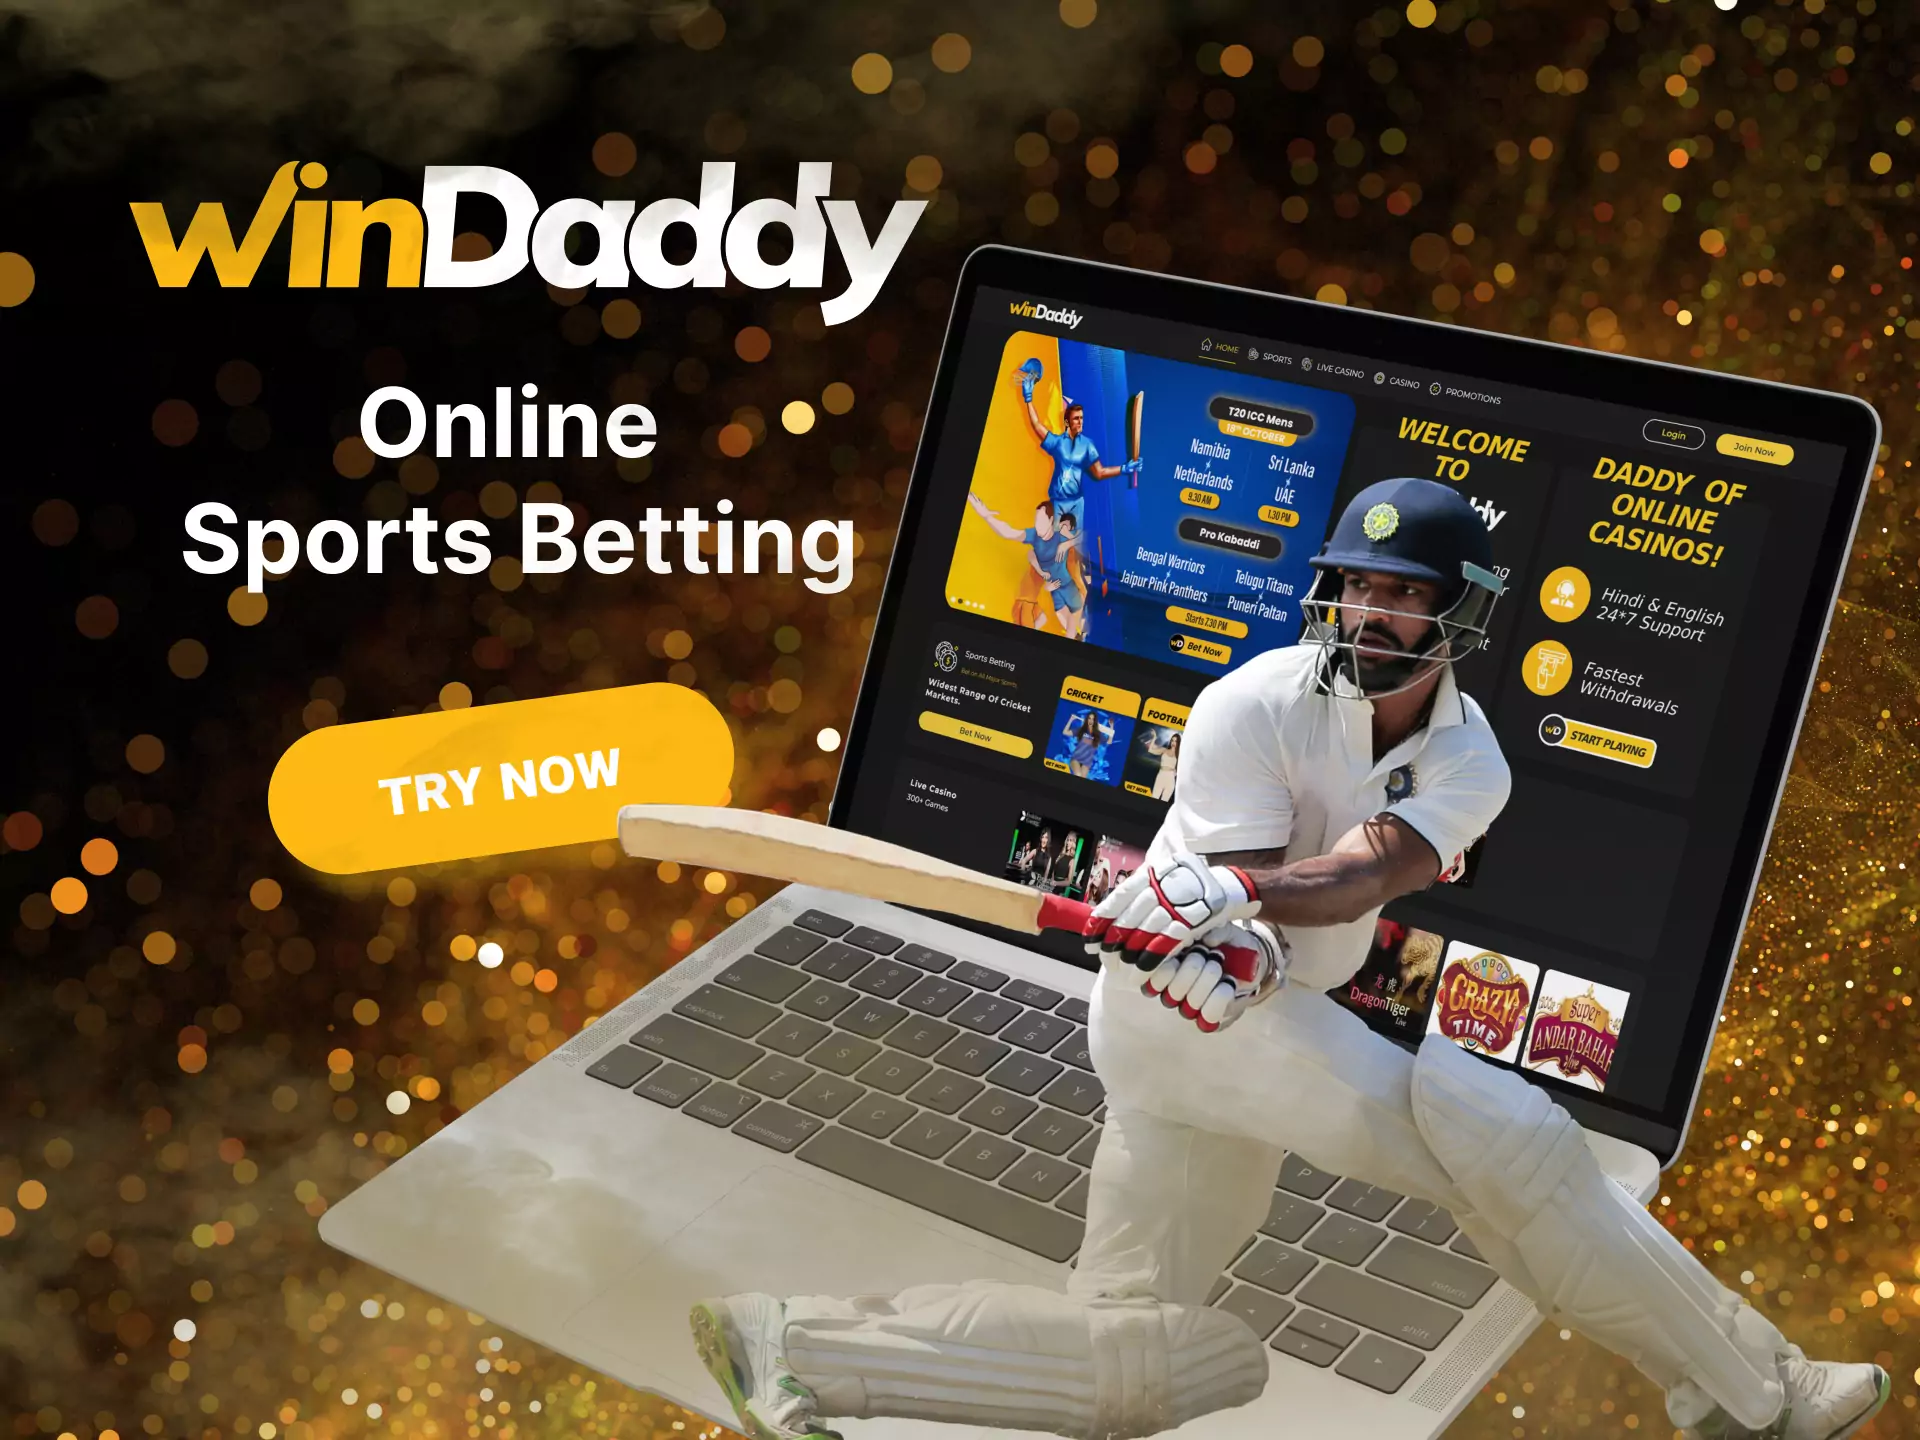 Place sports bets in Windaddy and win.